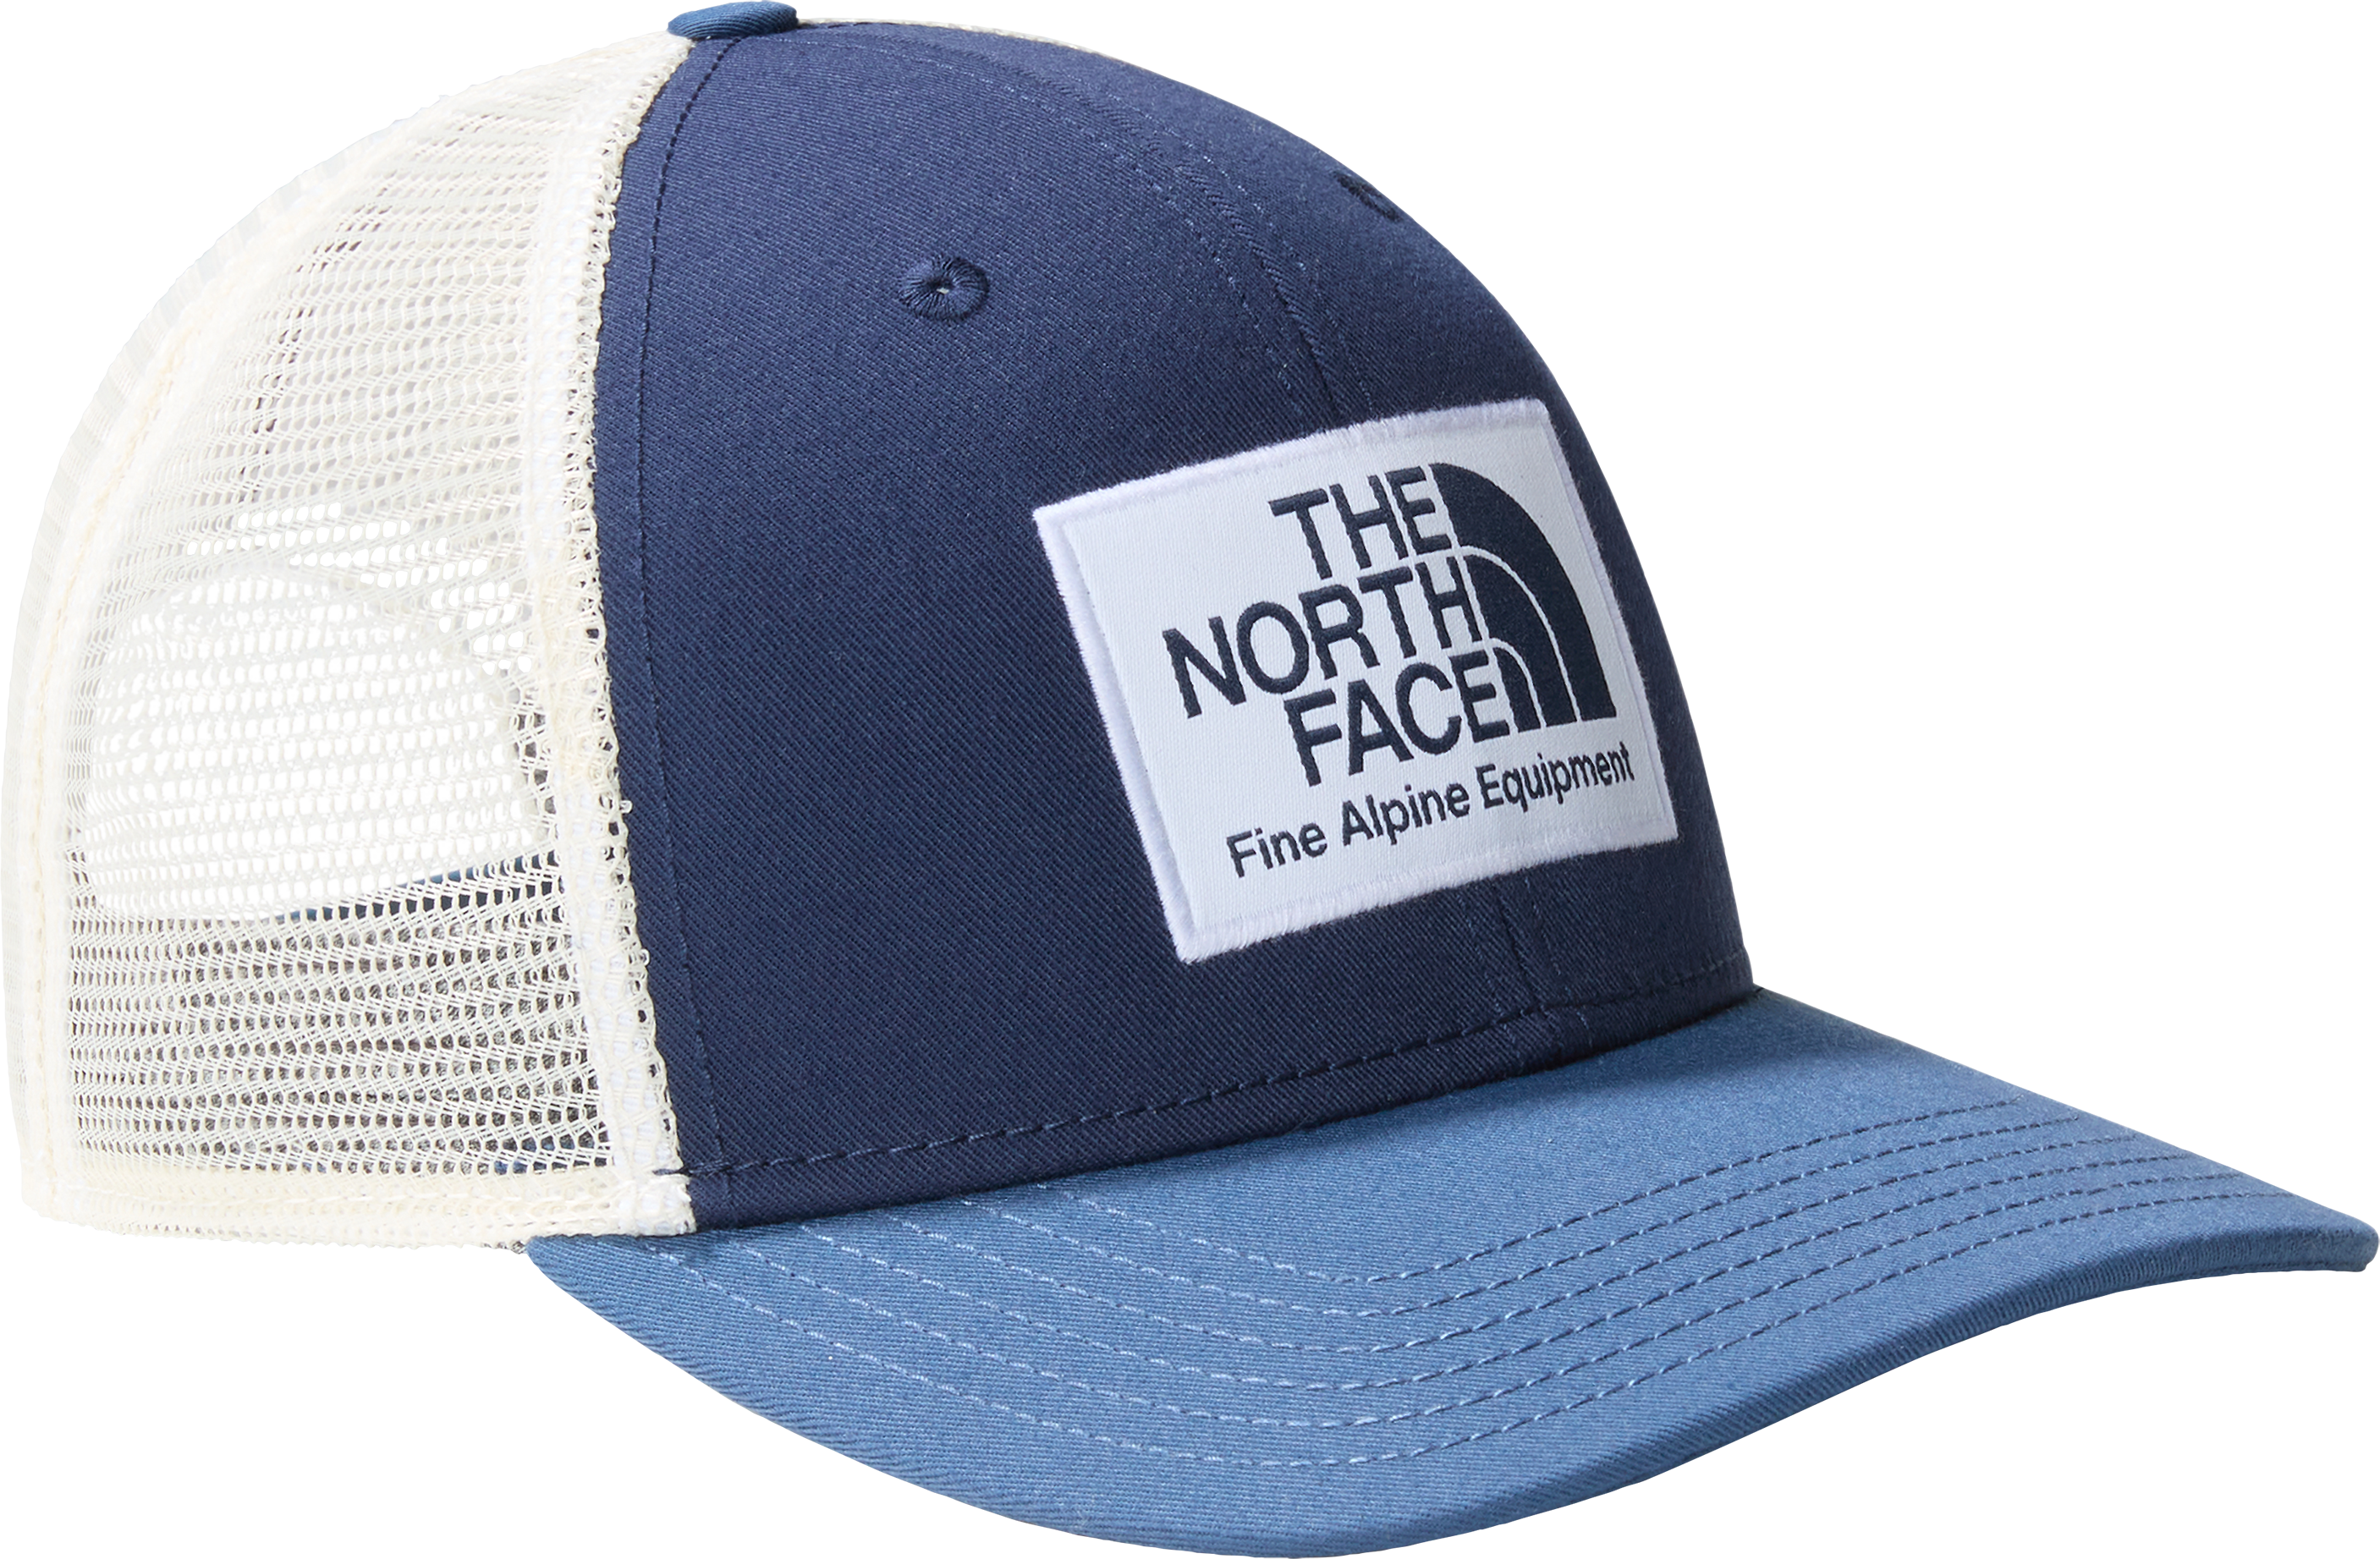 The North Face The North Face Deep Fit Mudder Trucker Cap SHADY BLUE/SUMMIT NAVY OneSize, SHADY BLUE/SUMMIT NAVY